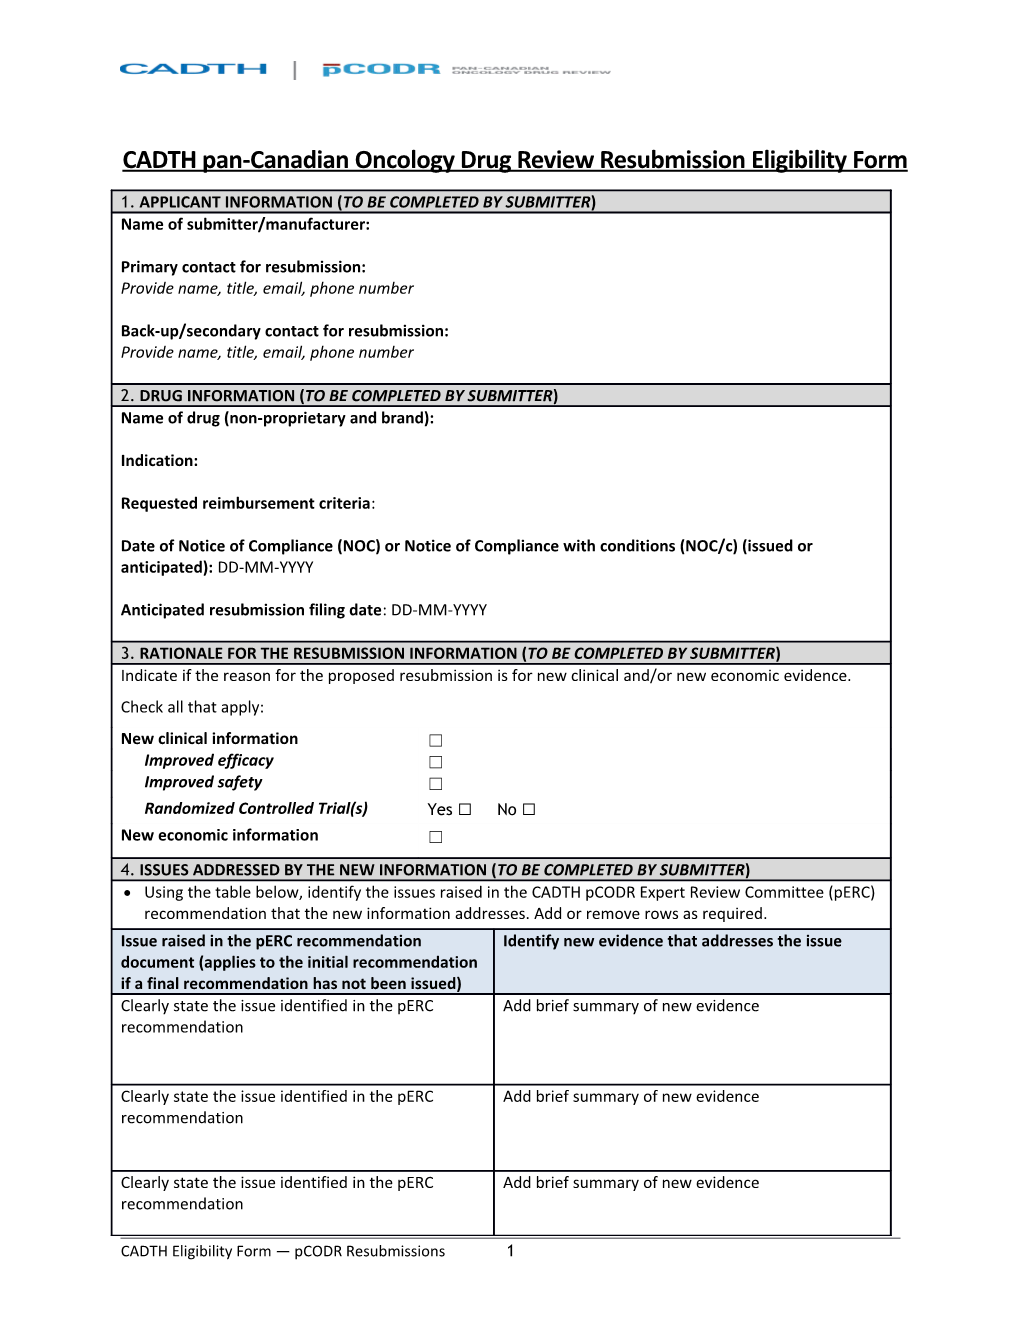 CADTH Pan-Canadian Oncology Drug Review Resubmission Eligibility Form